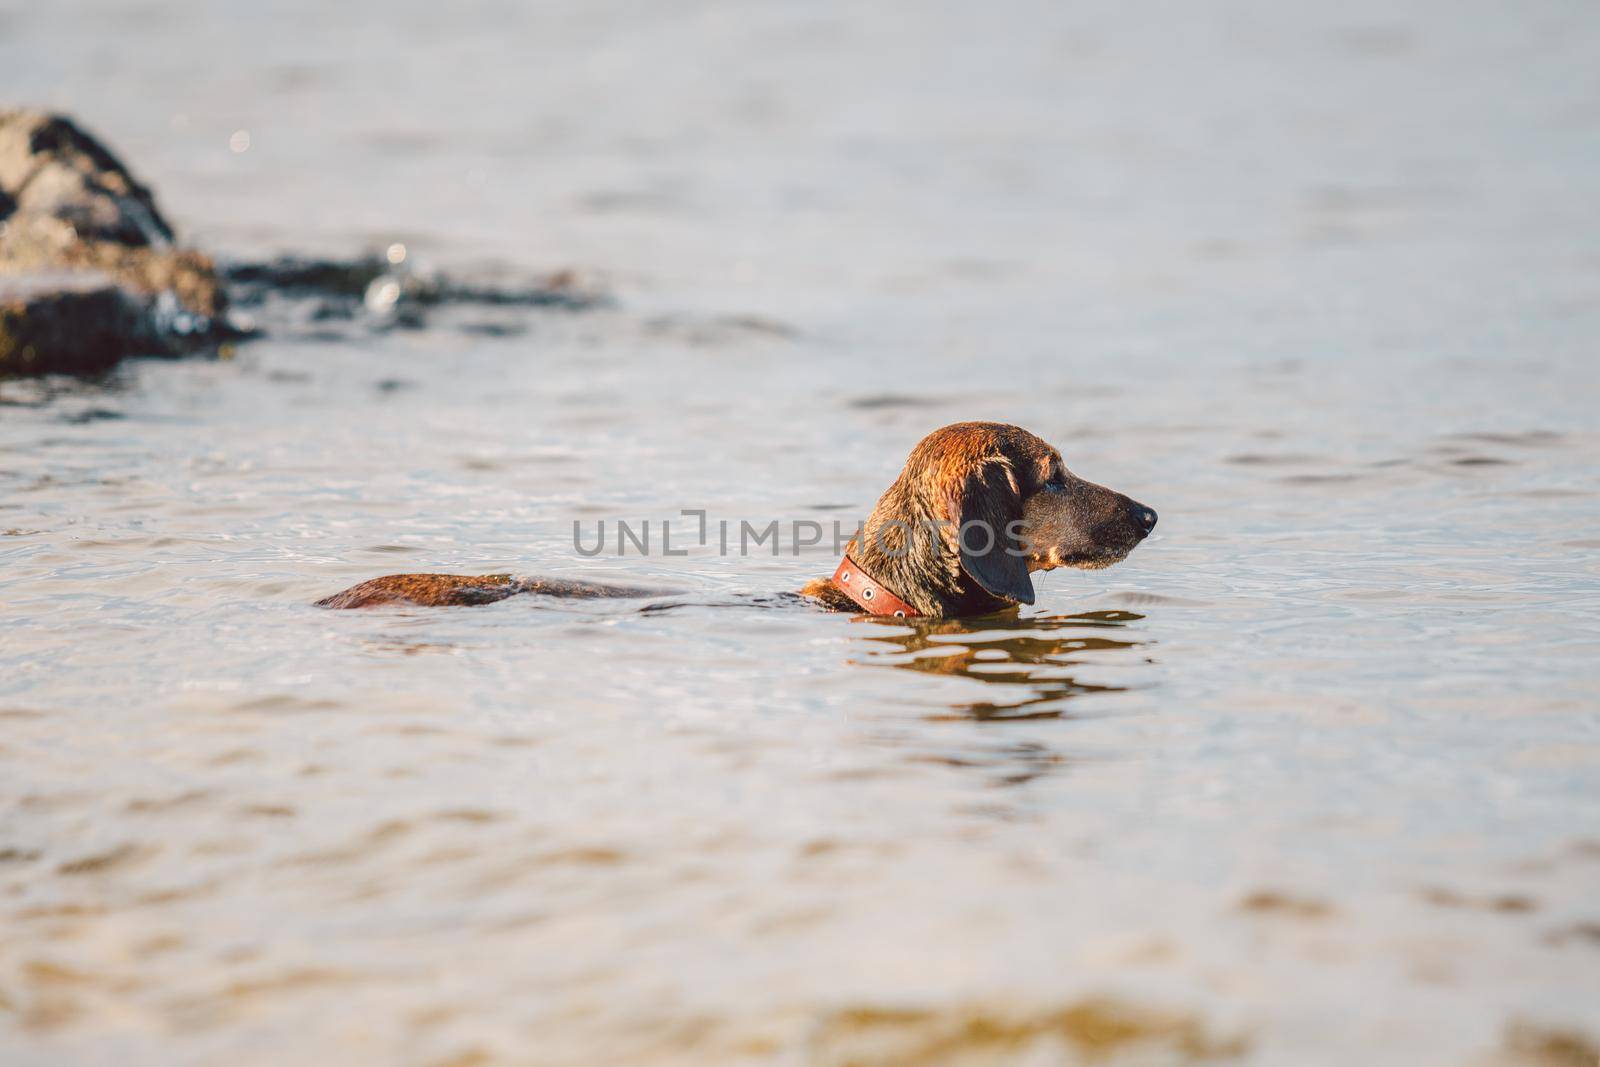 Summertime theme with a pet on the riverbank. Dachshund dog breed looks forward while standing in the water. hunting dog looks at birds in the lake and is ready to attack by Tomashevska